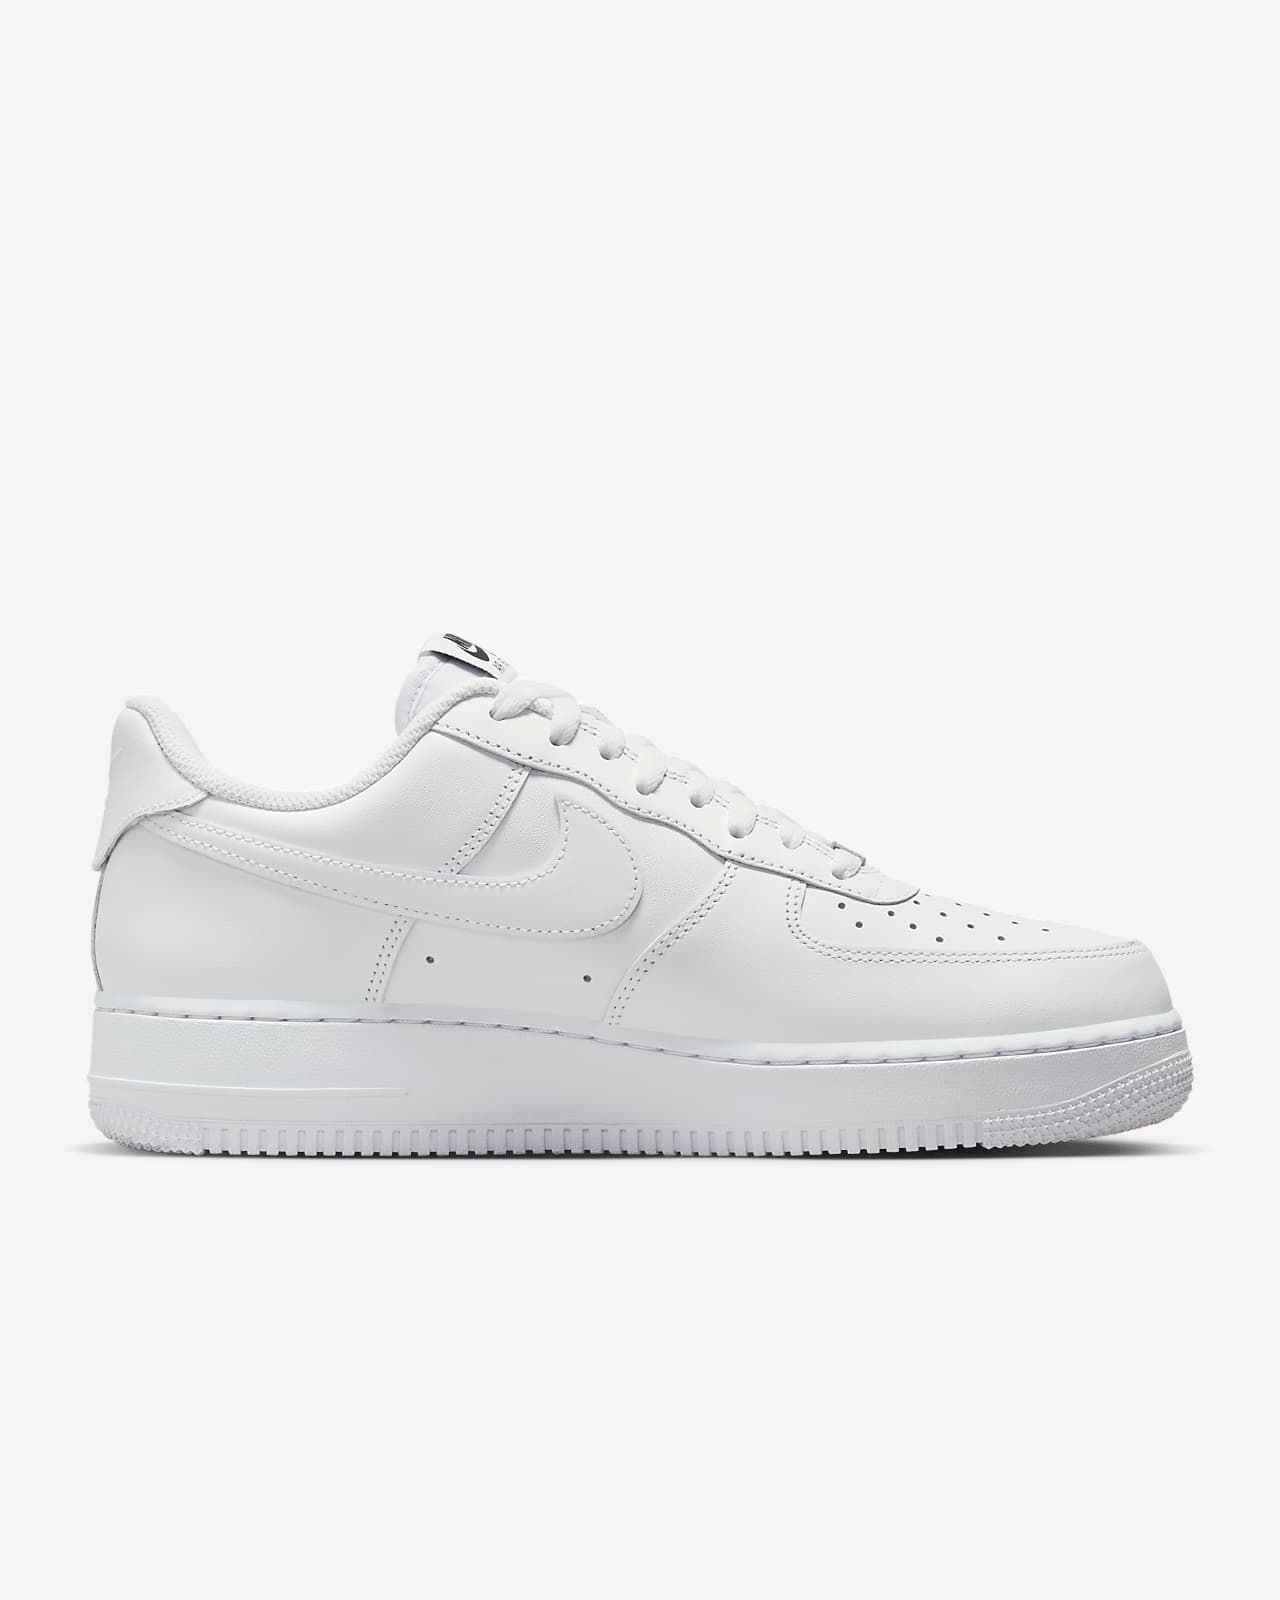 Nike - Giày thời trang thể thao Nam Air Force 1 '07 FlyEase Men's Shoes